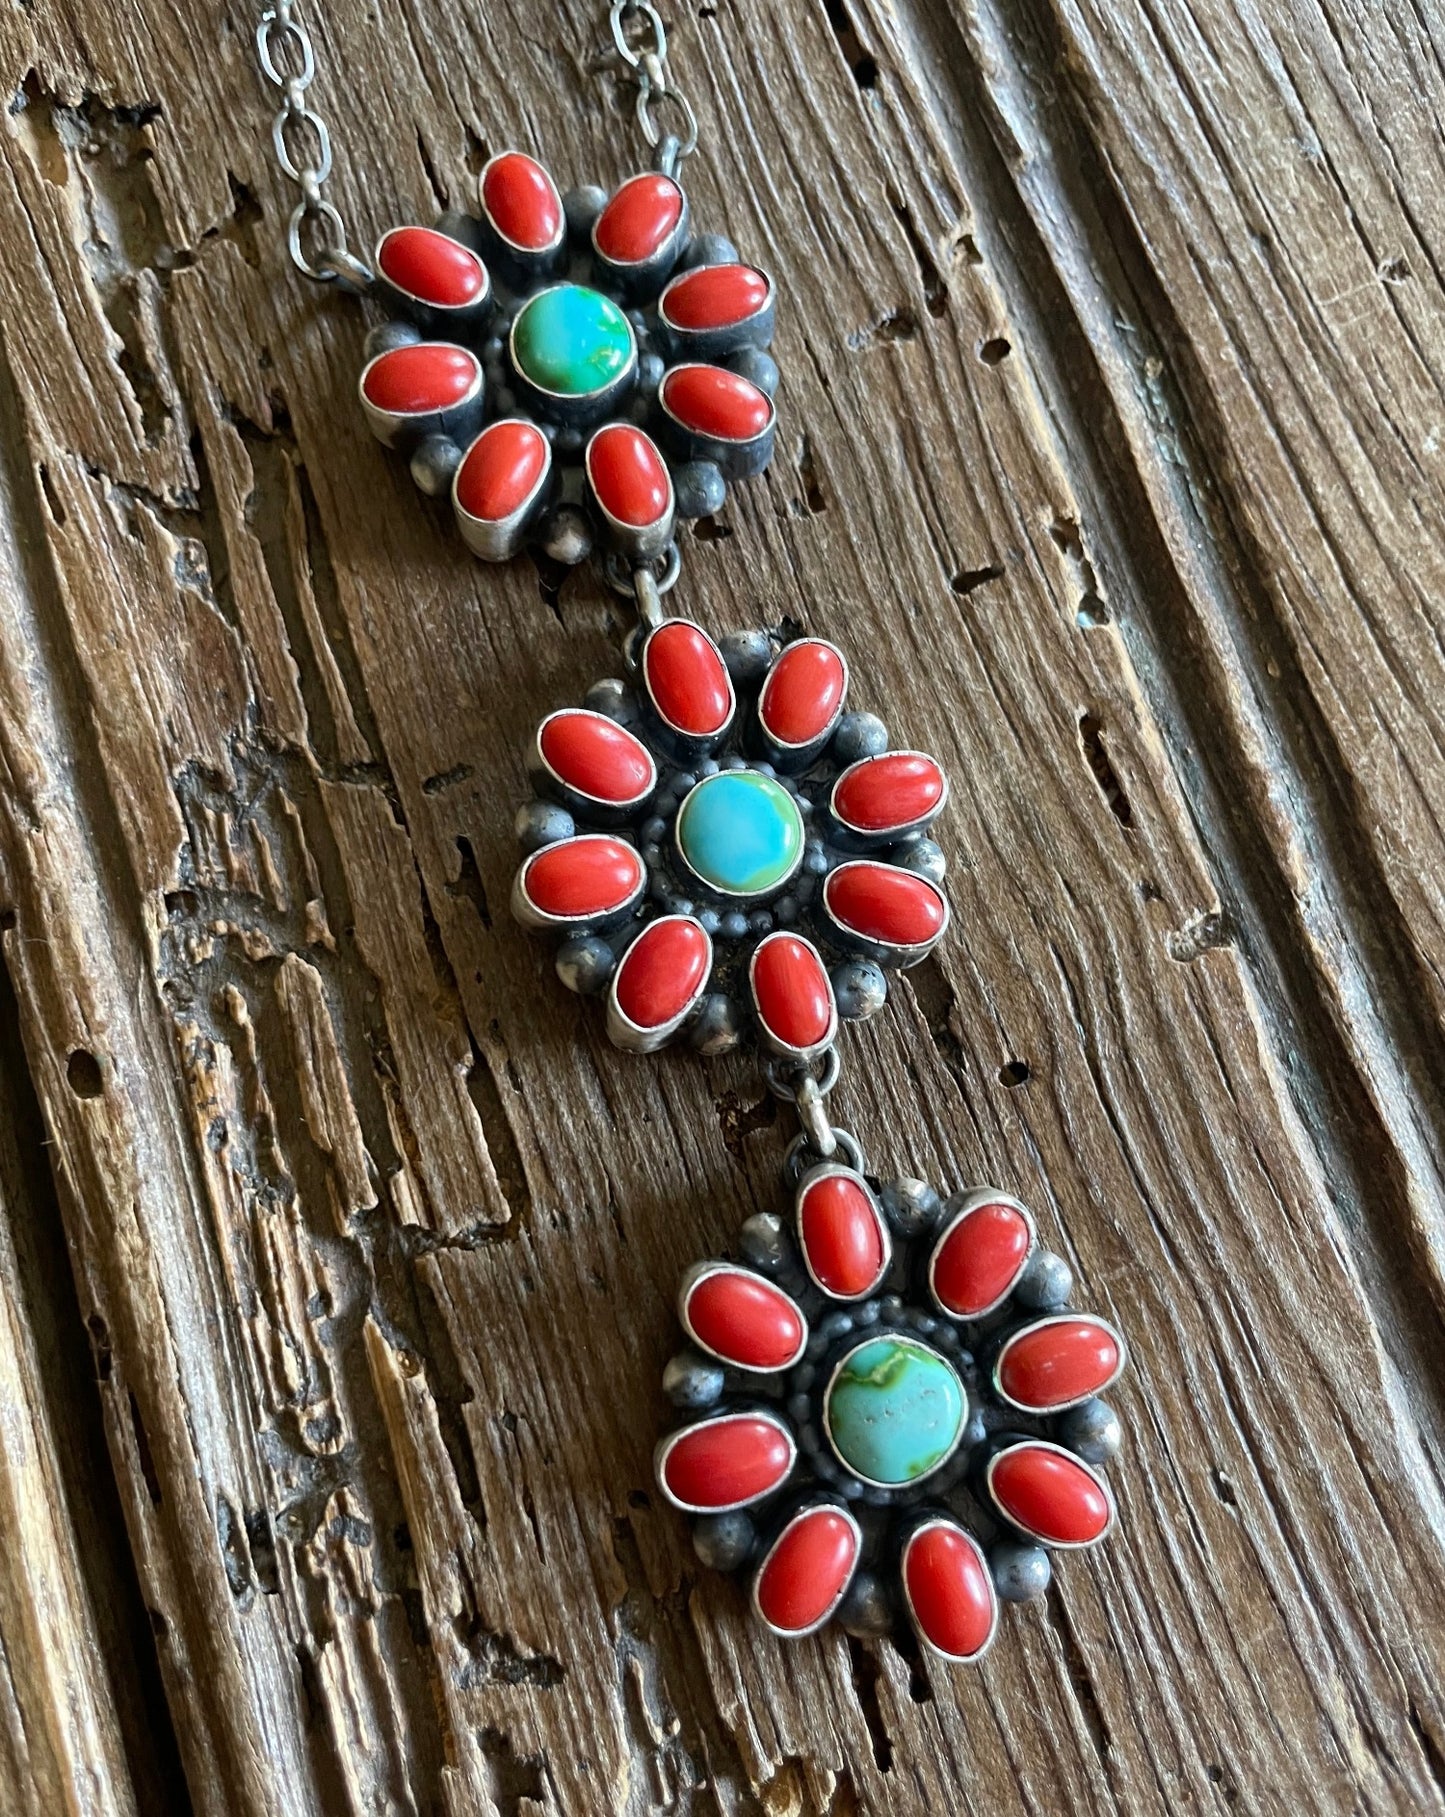 Red Mesa Necklace